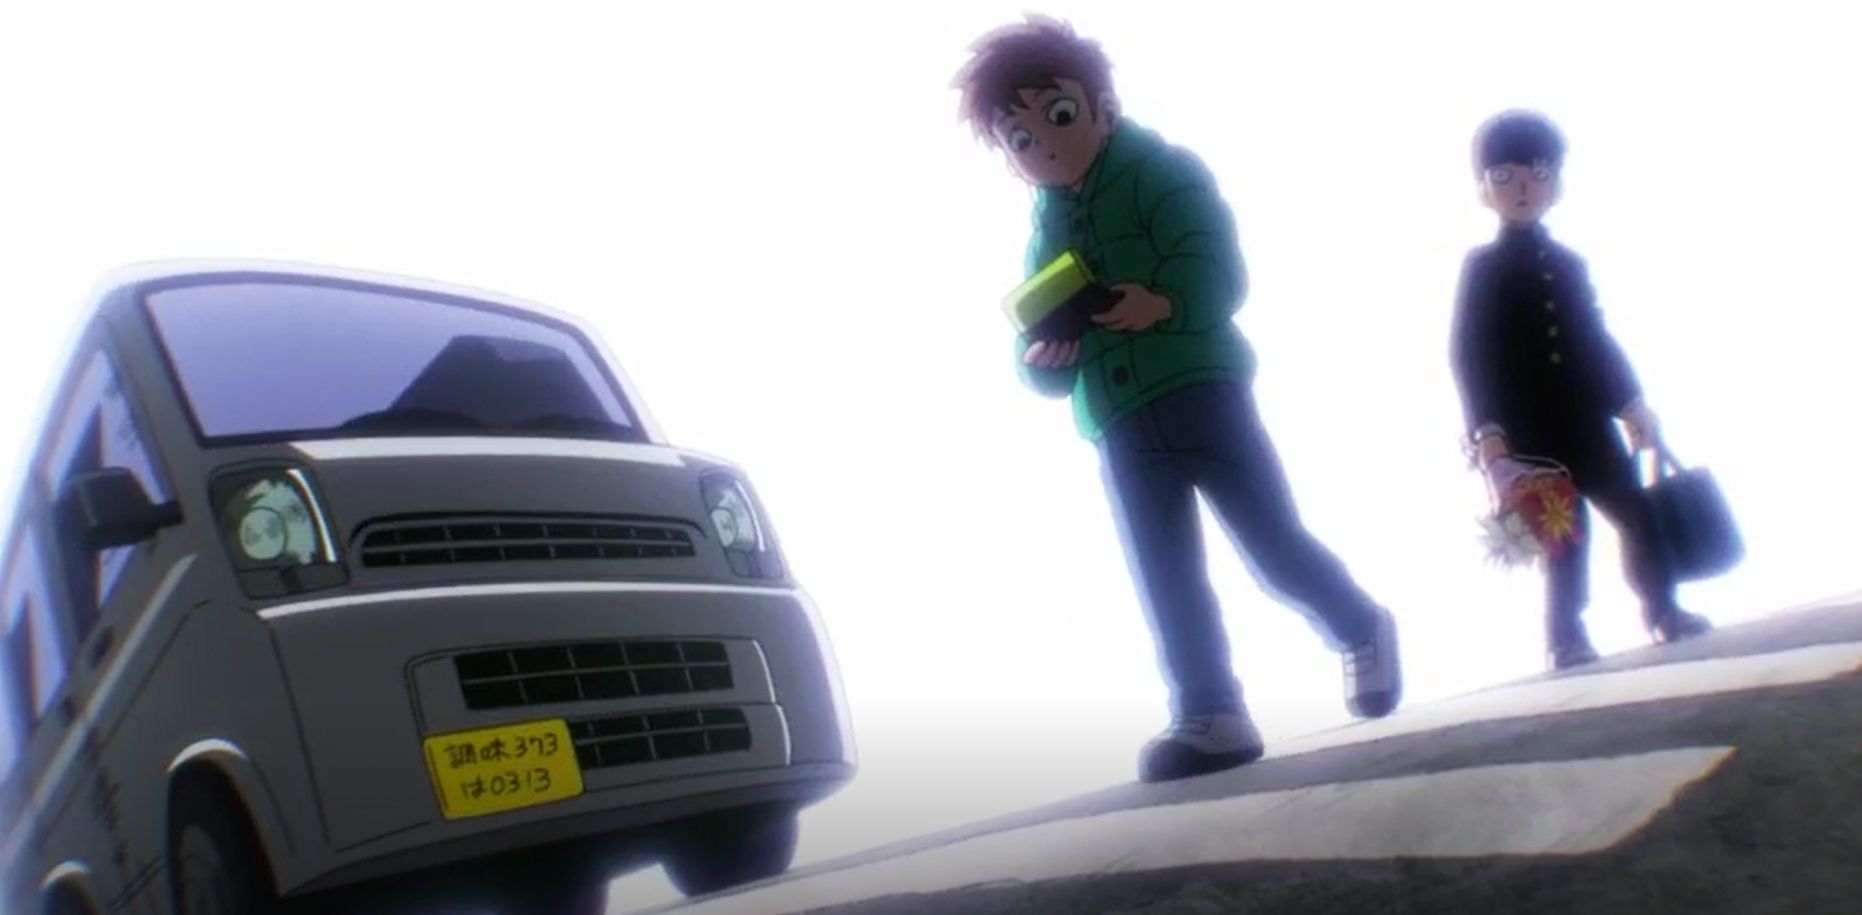 Shigeo saves a kid from a car accident in Mob Psycho 100.